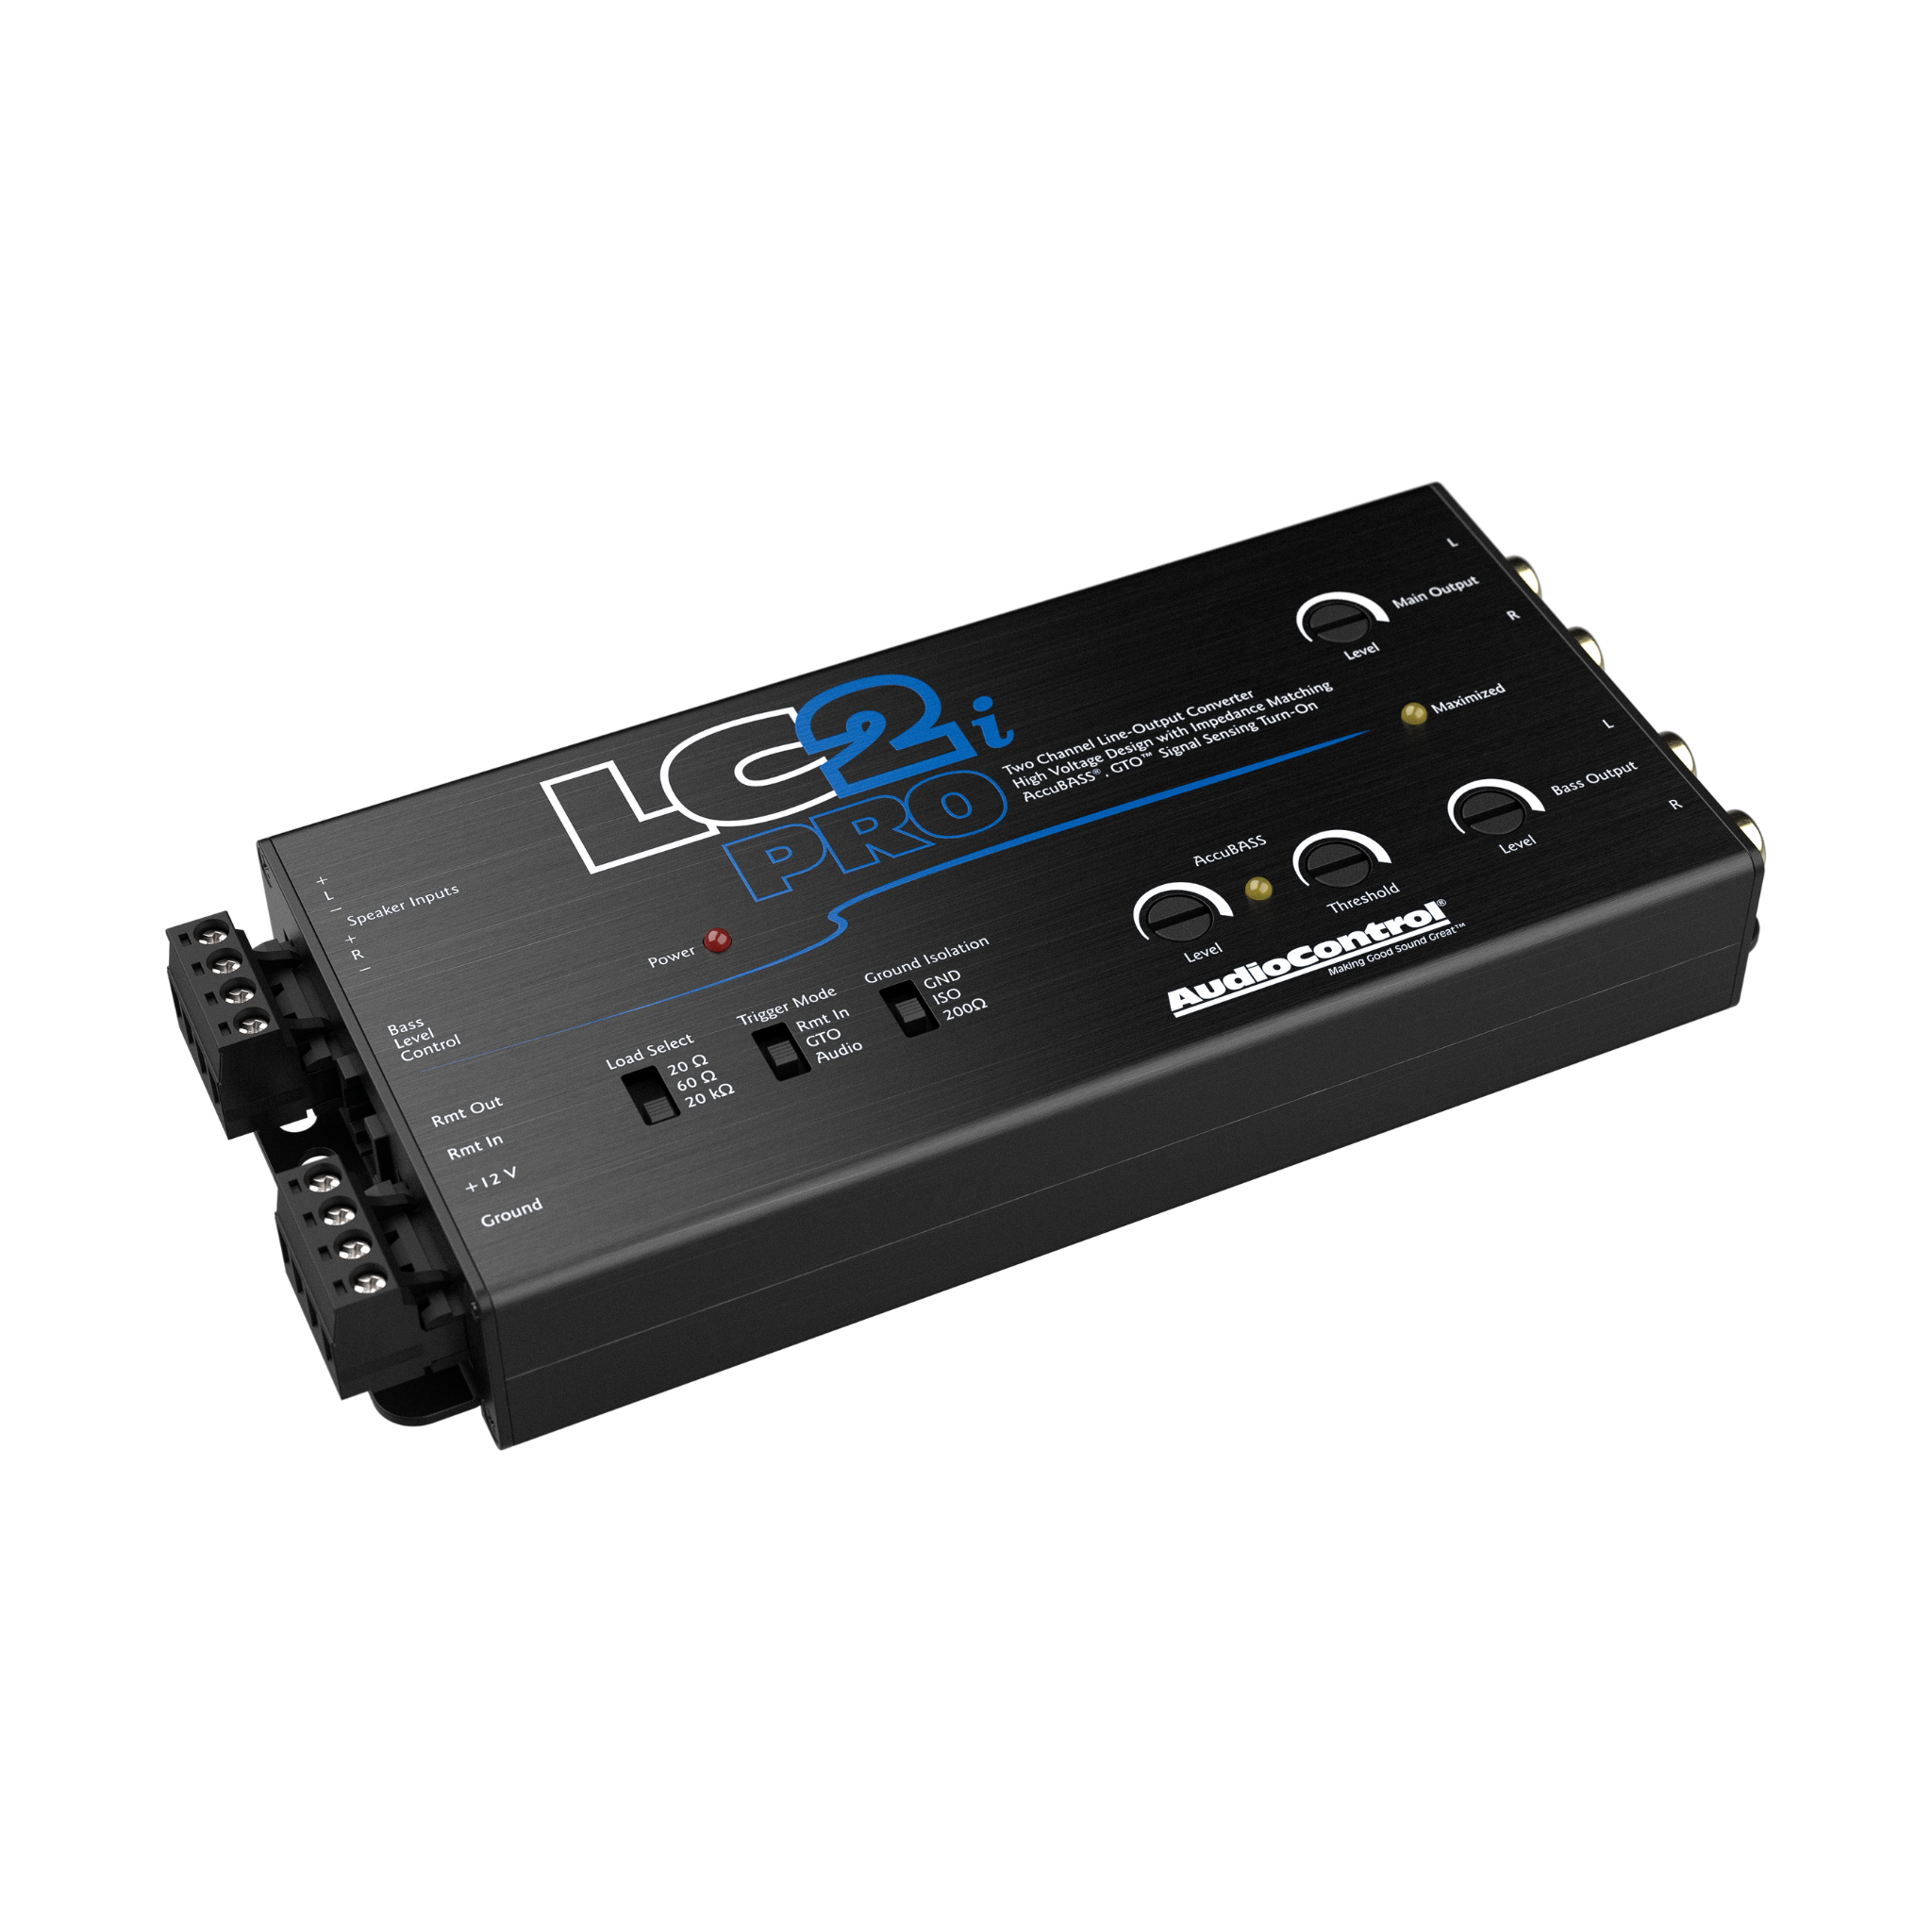 AudioControl LC2i PRO 2-Channel Line Output Converter with ACR-1 Dash Remote Subwoofer Control